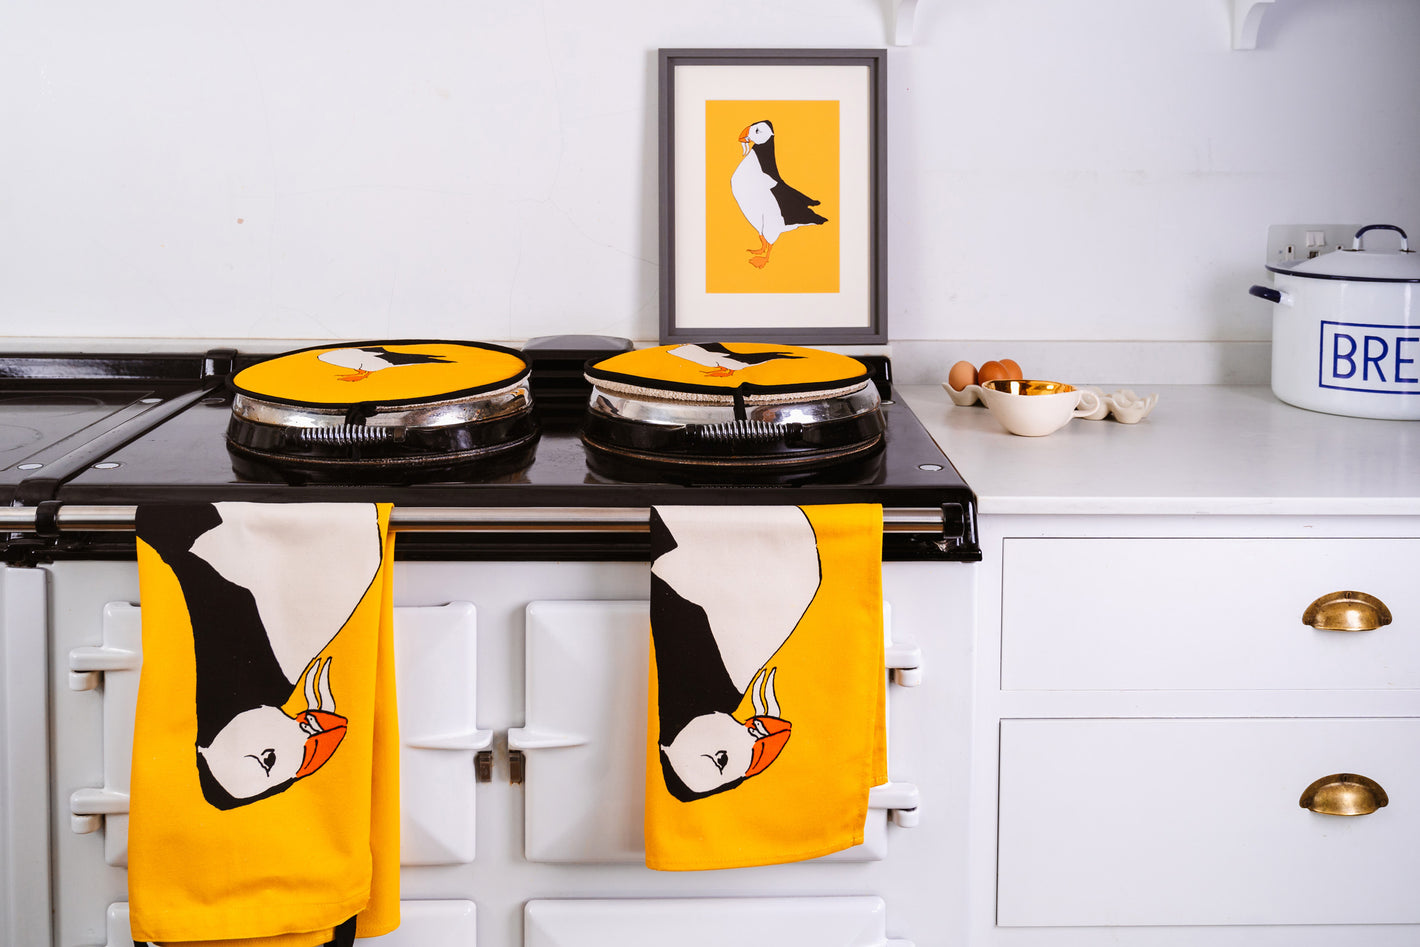 Aga pads from Cluck Cluck in Suffolk with Puffin design